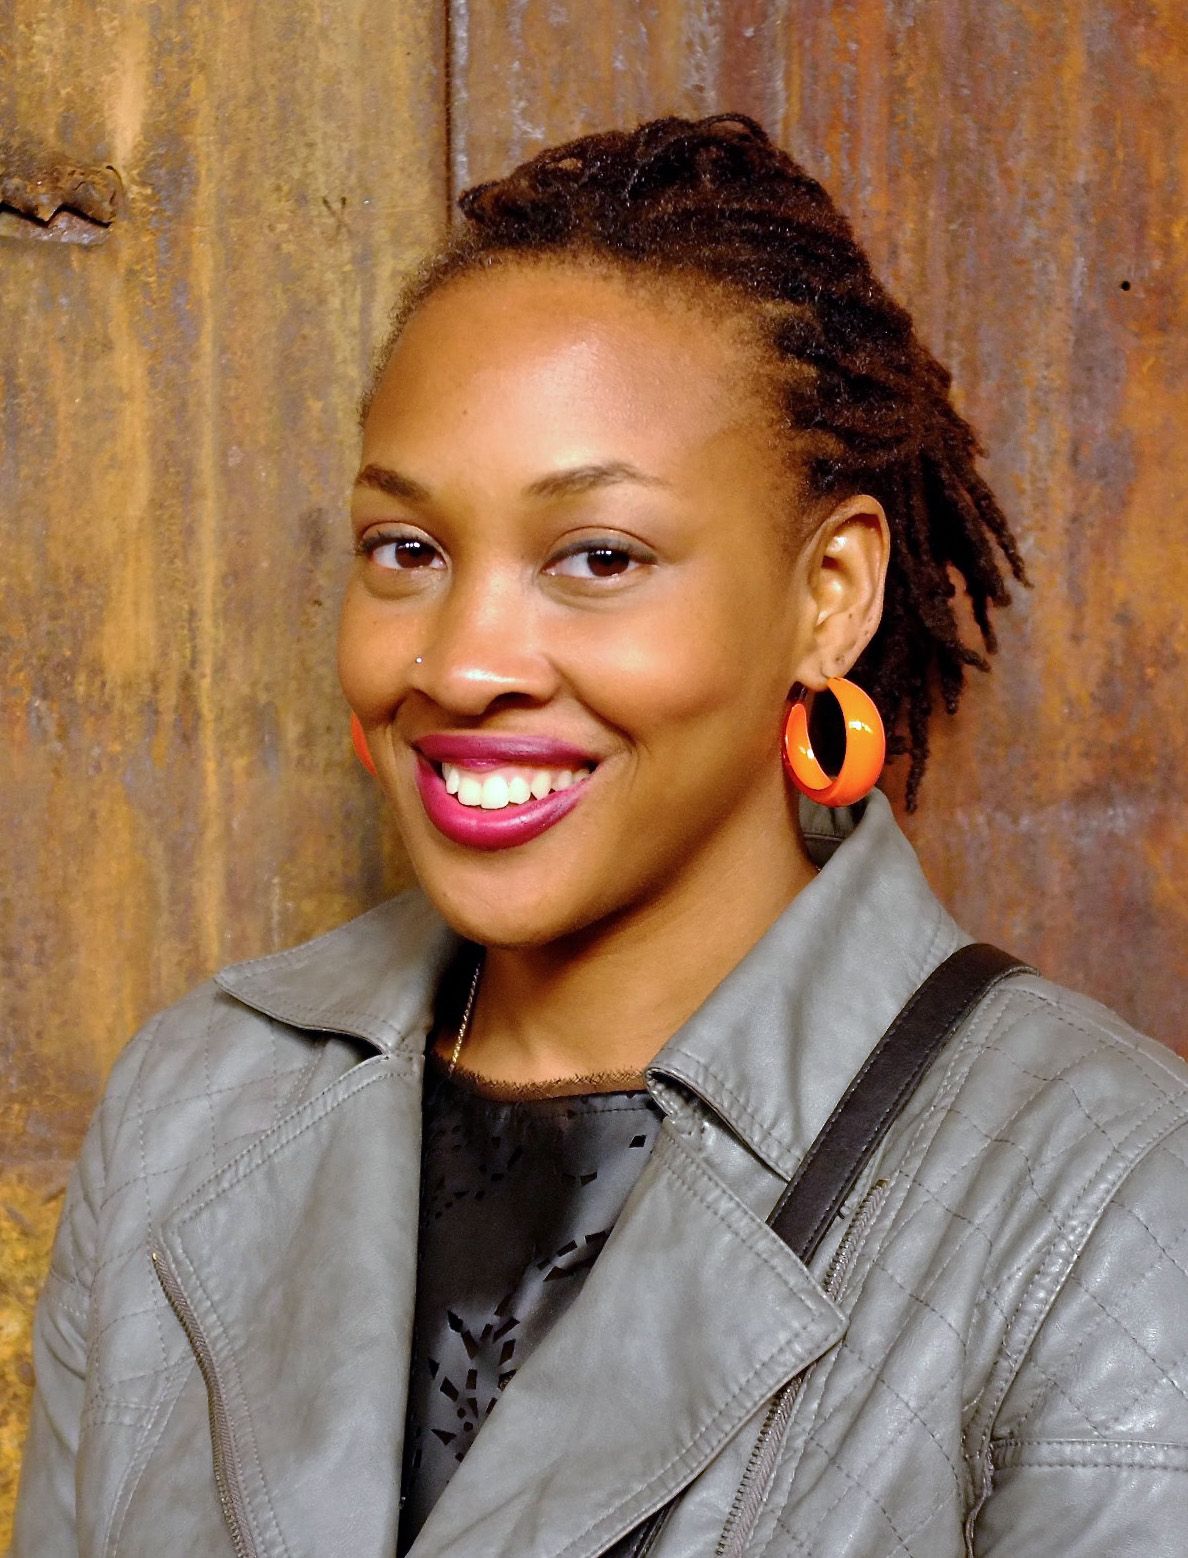 Local Author Naomi Jackson Connects Brooklyn And The Caribbean In Her Writing